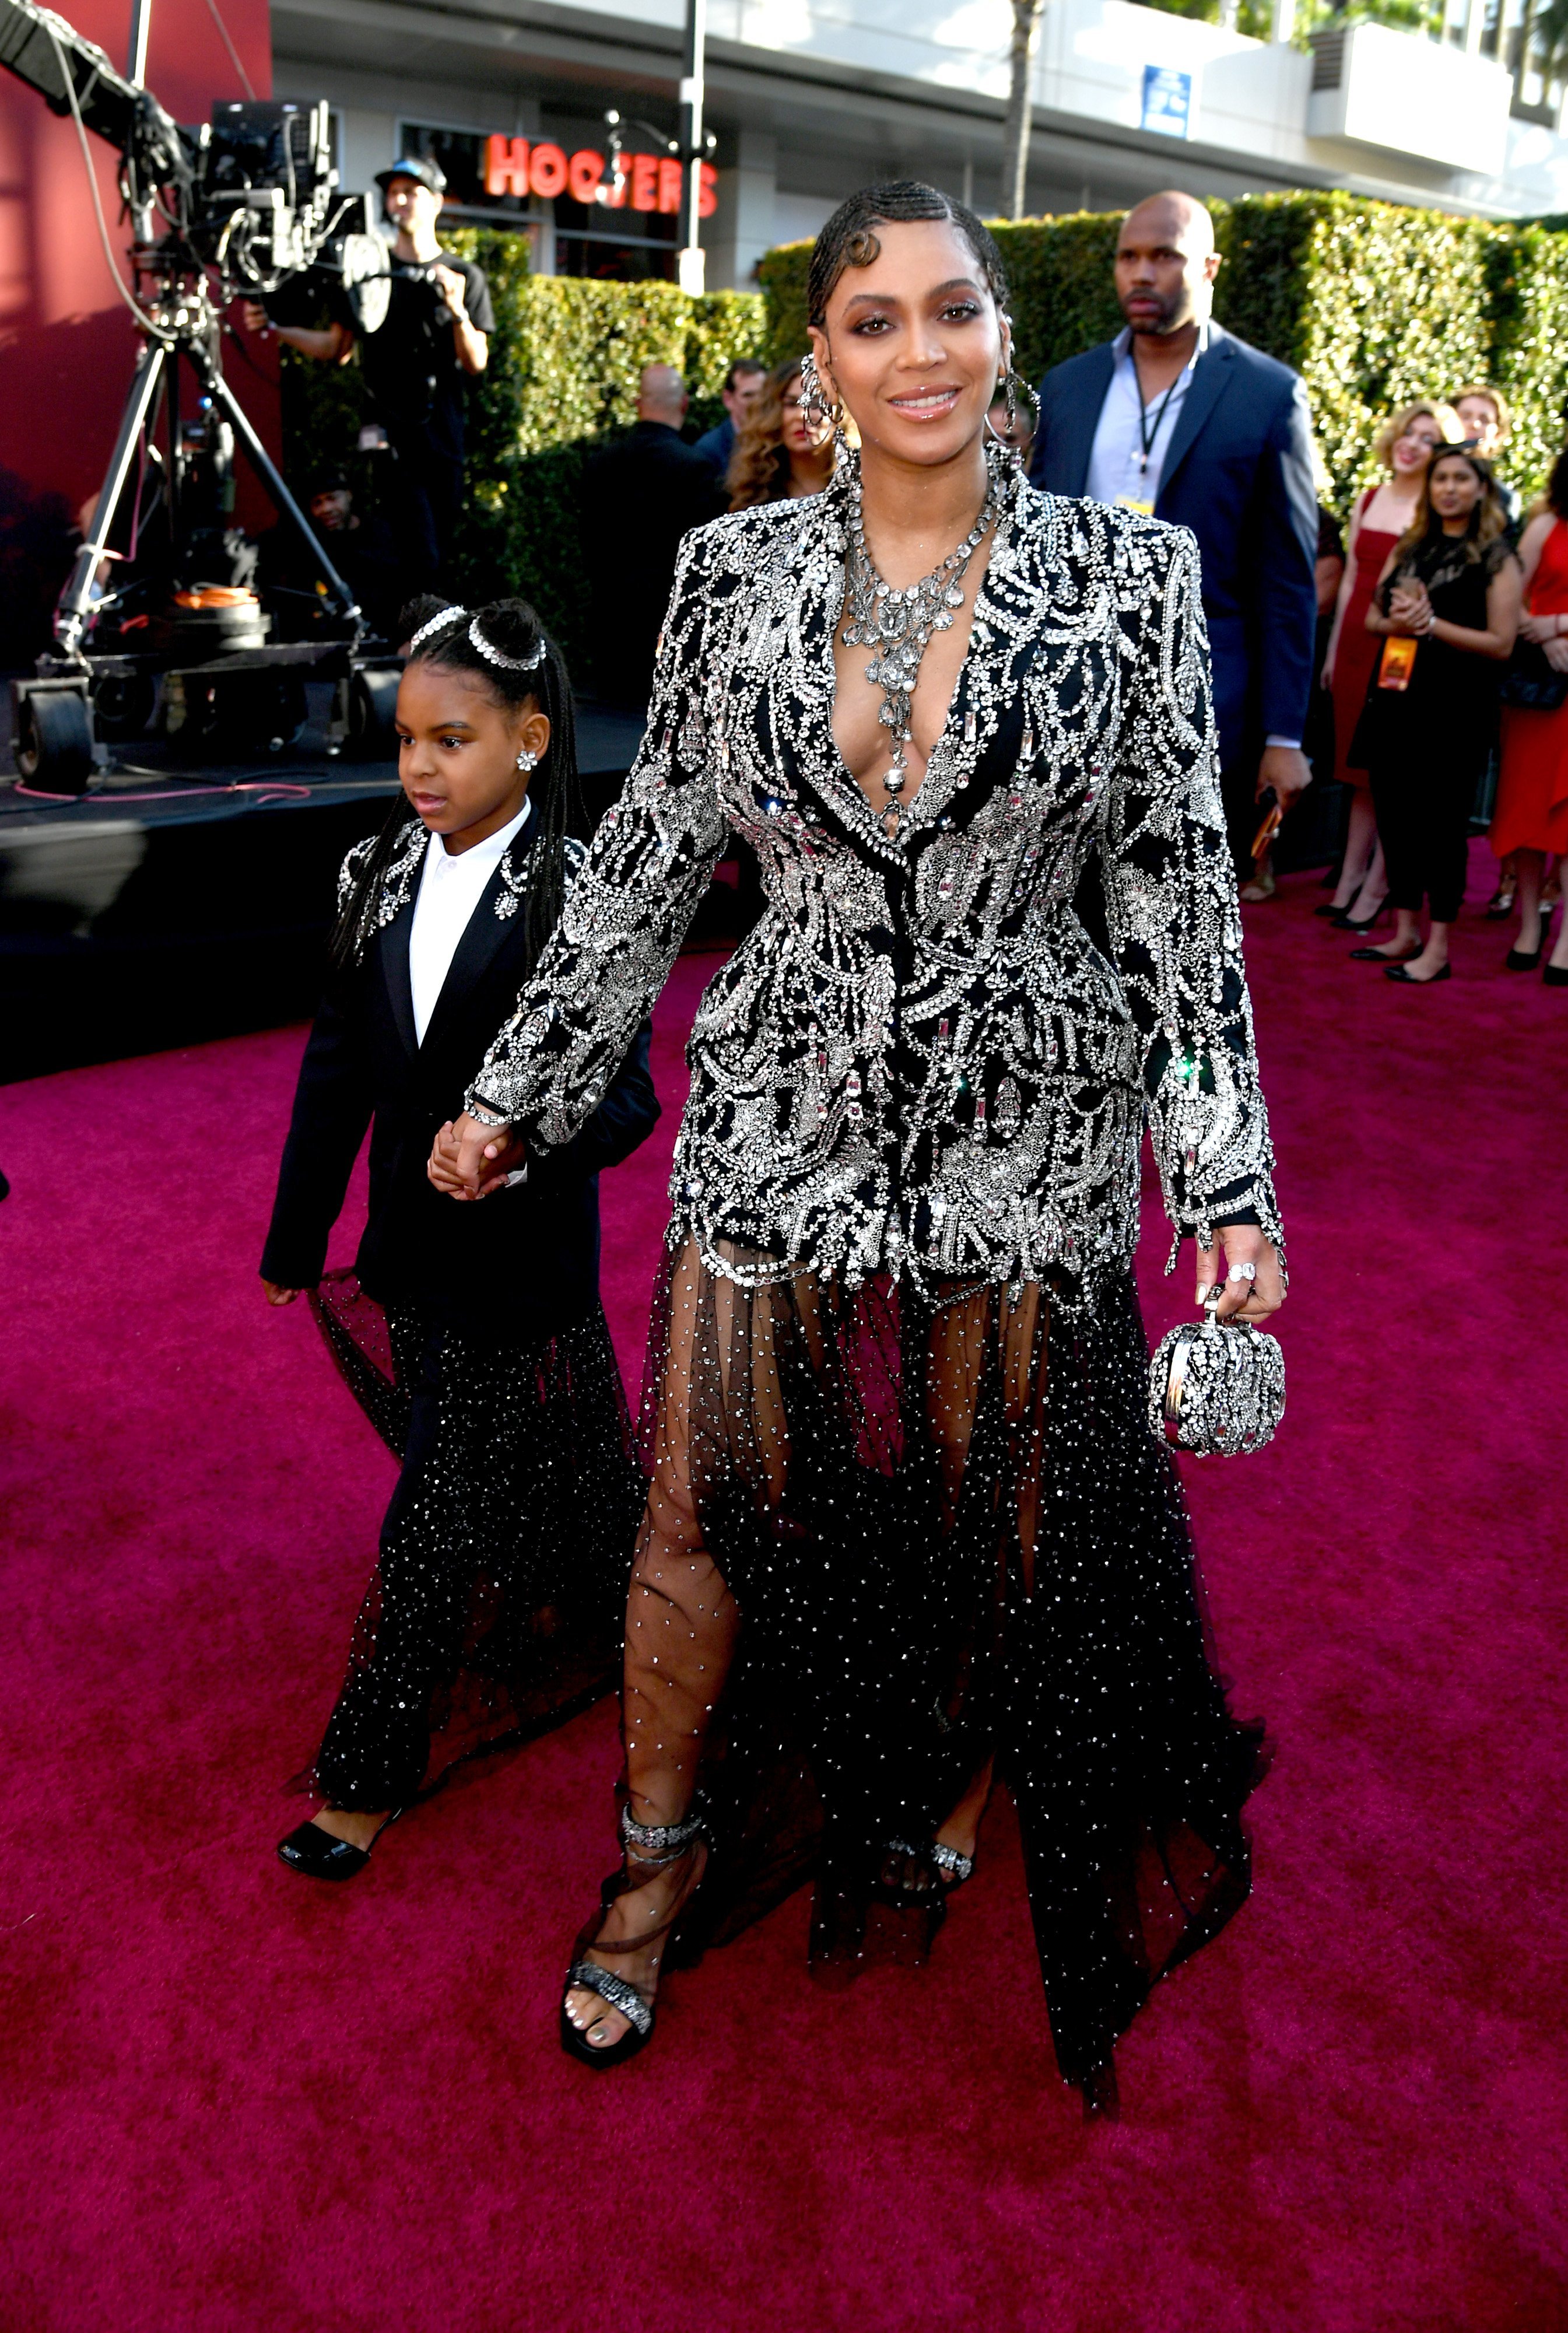 Beyonce and daughter Blue Ivy Carter at the Hollywood premiere of "The Lion King" in July 2019. | Photo: Getty Images